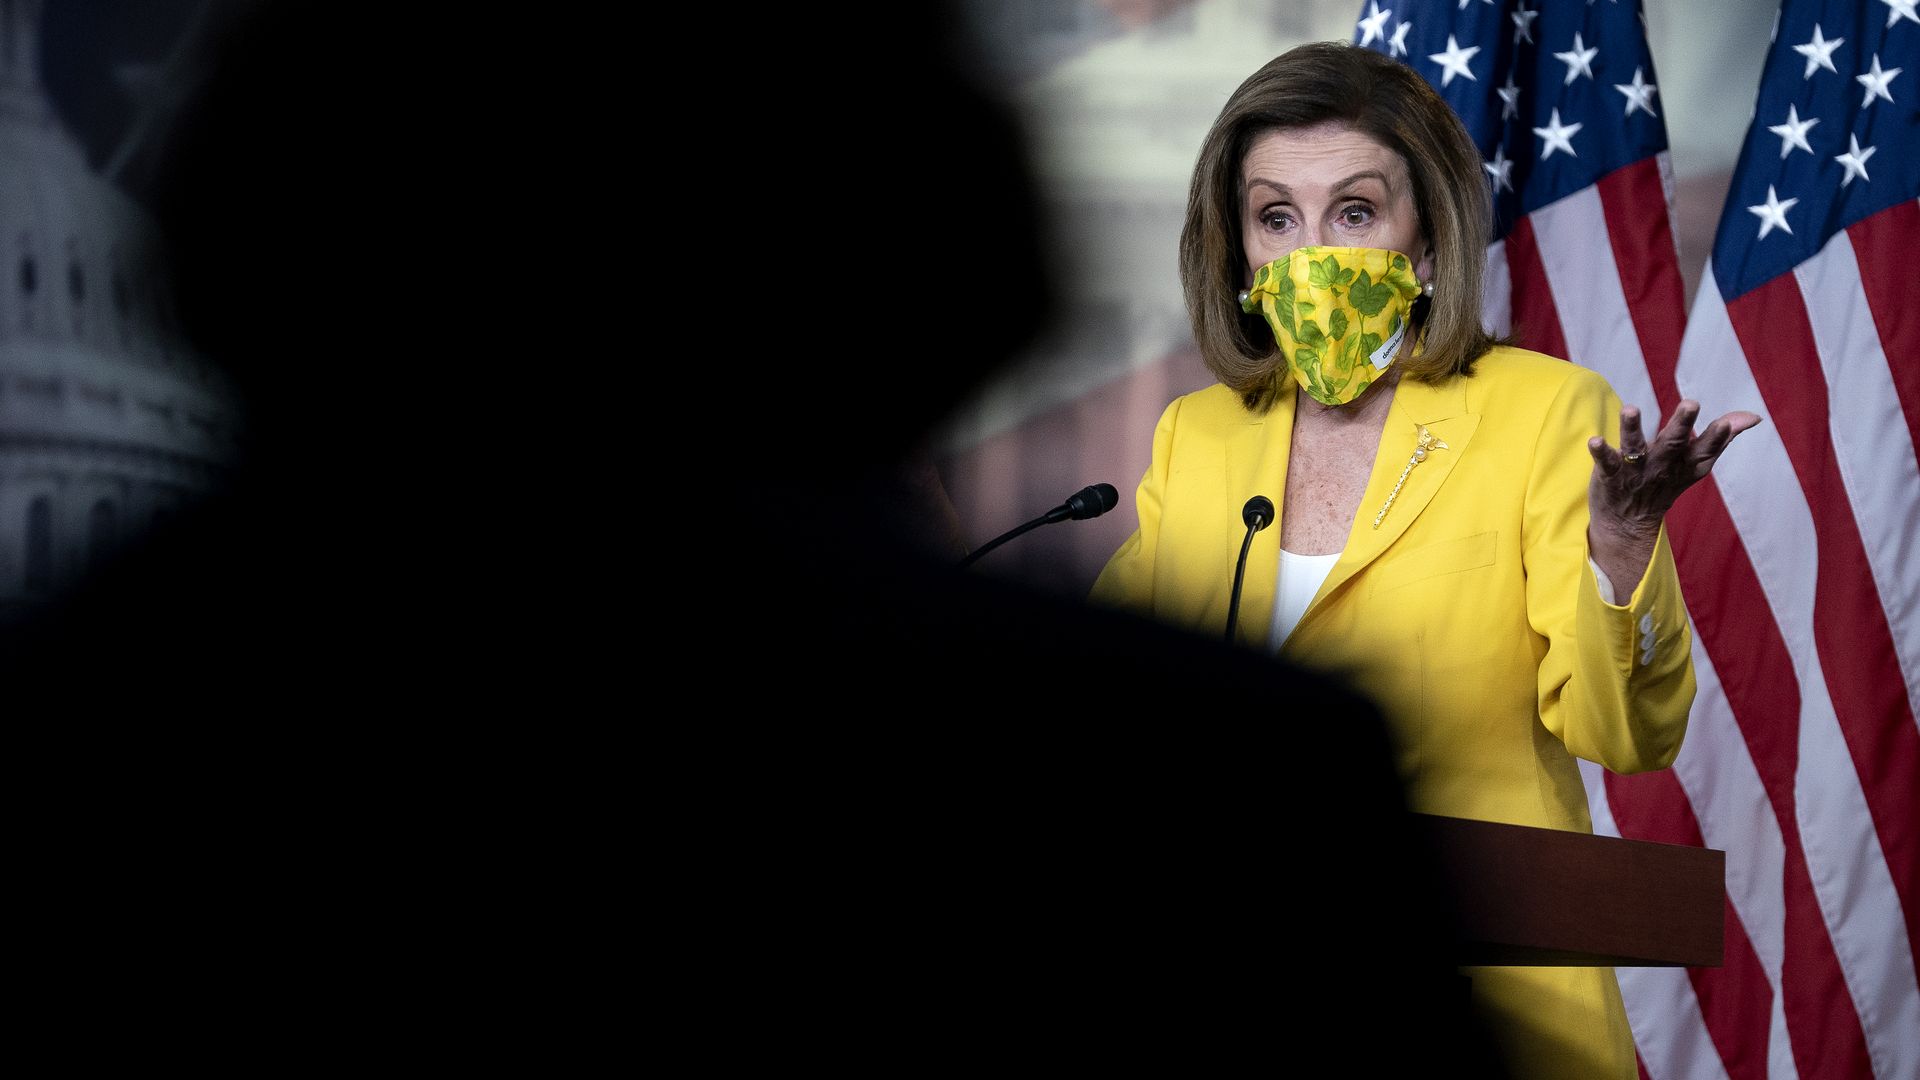 House Speaker Nancy Pelosi is seen addressing reporters during her weekly news conference.